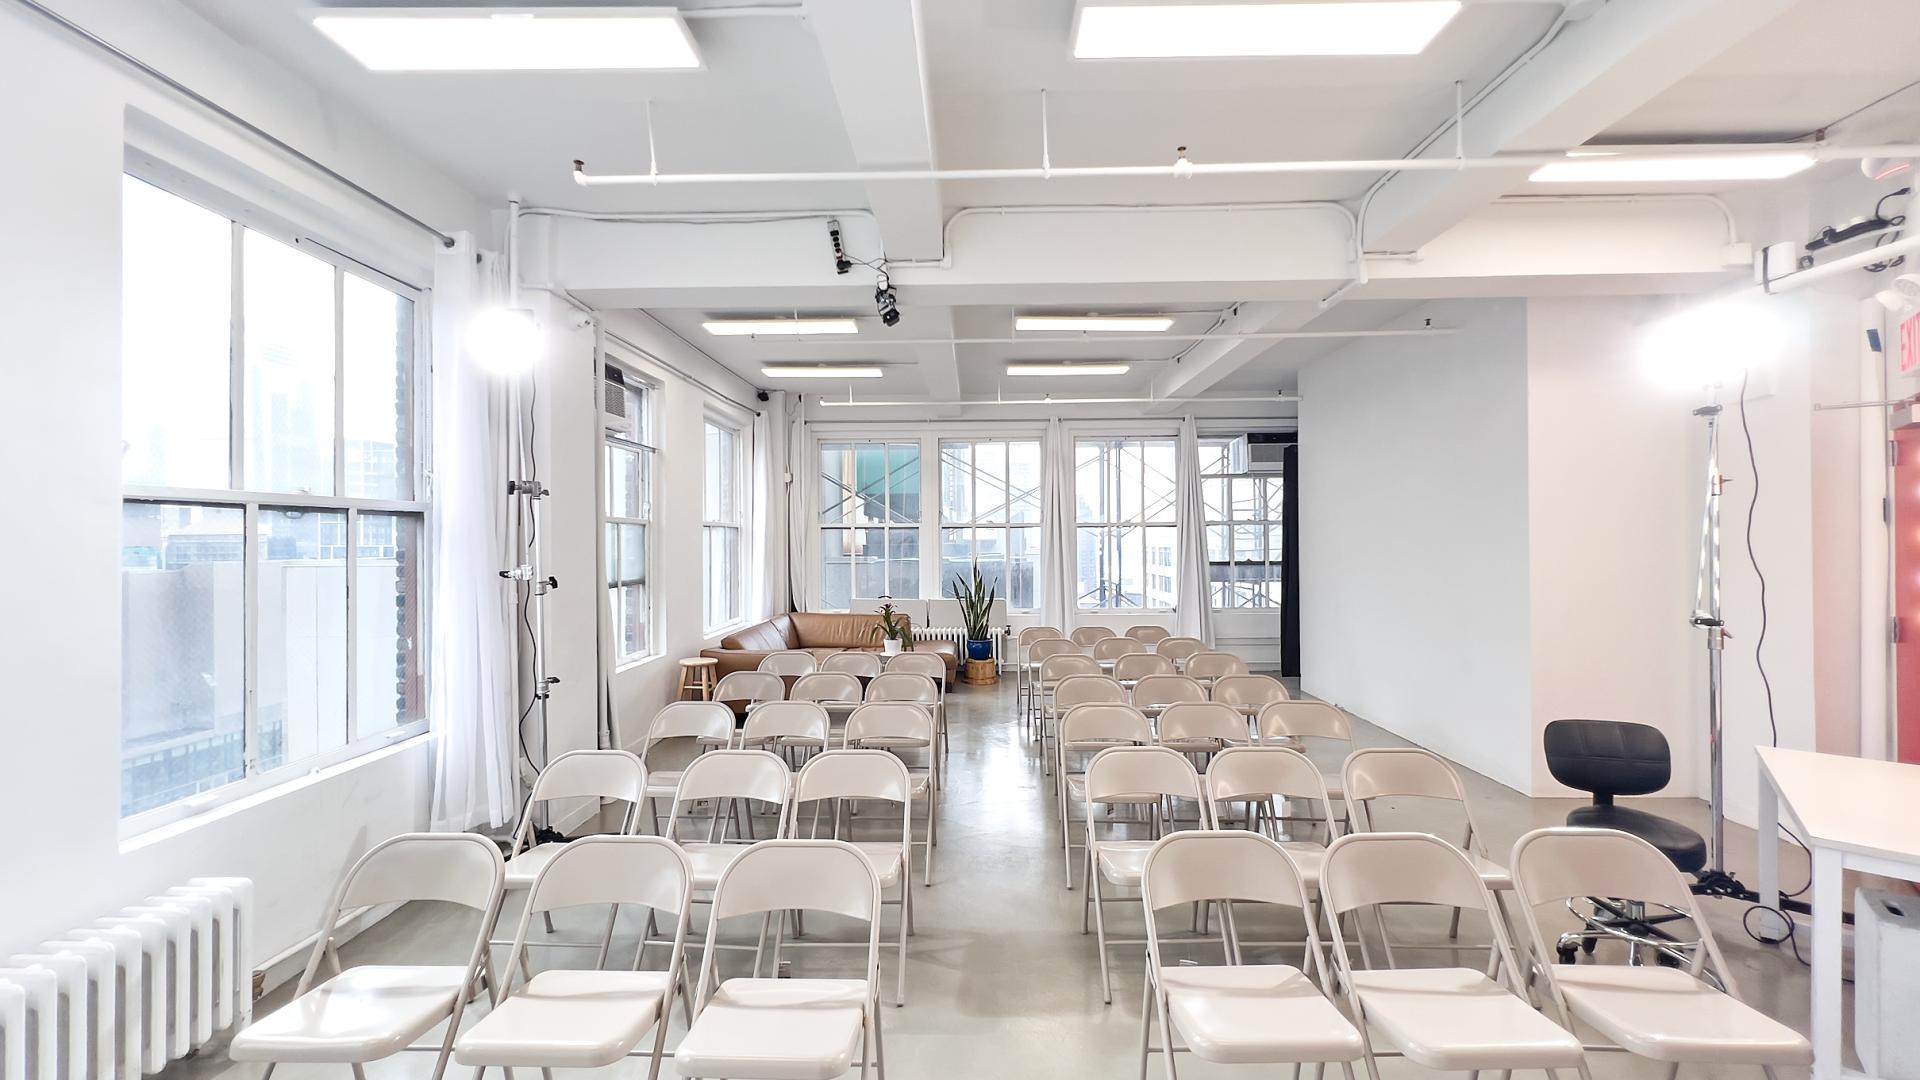 Press Conference Venues for Rent in New York City, NY